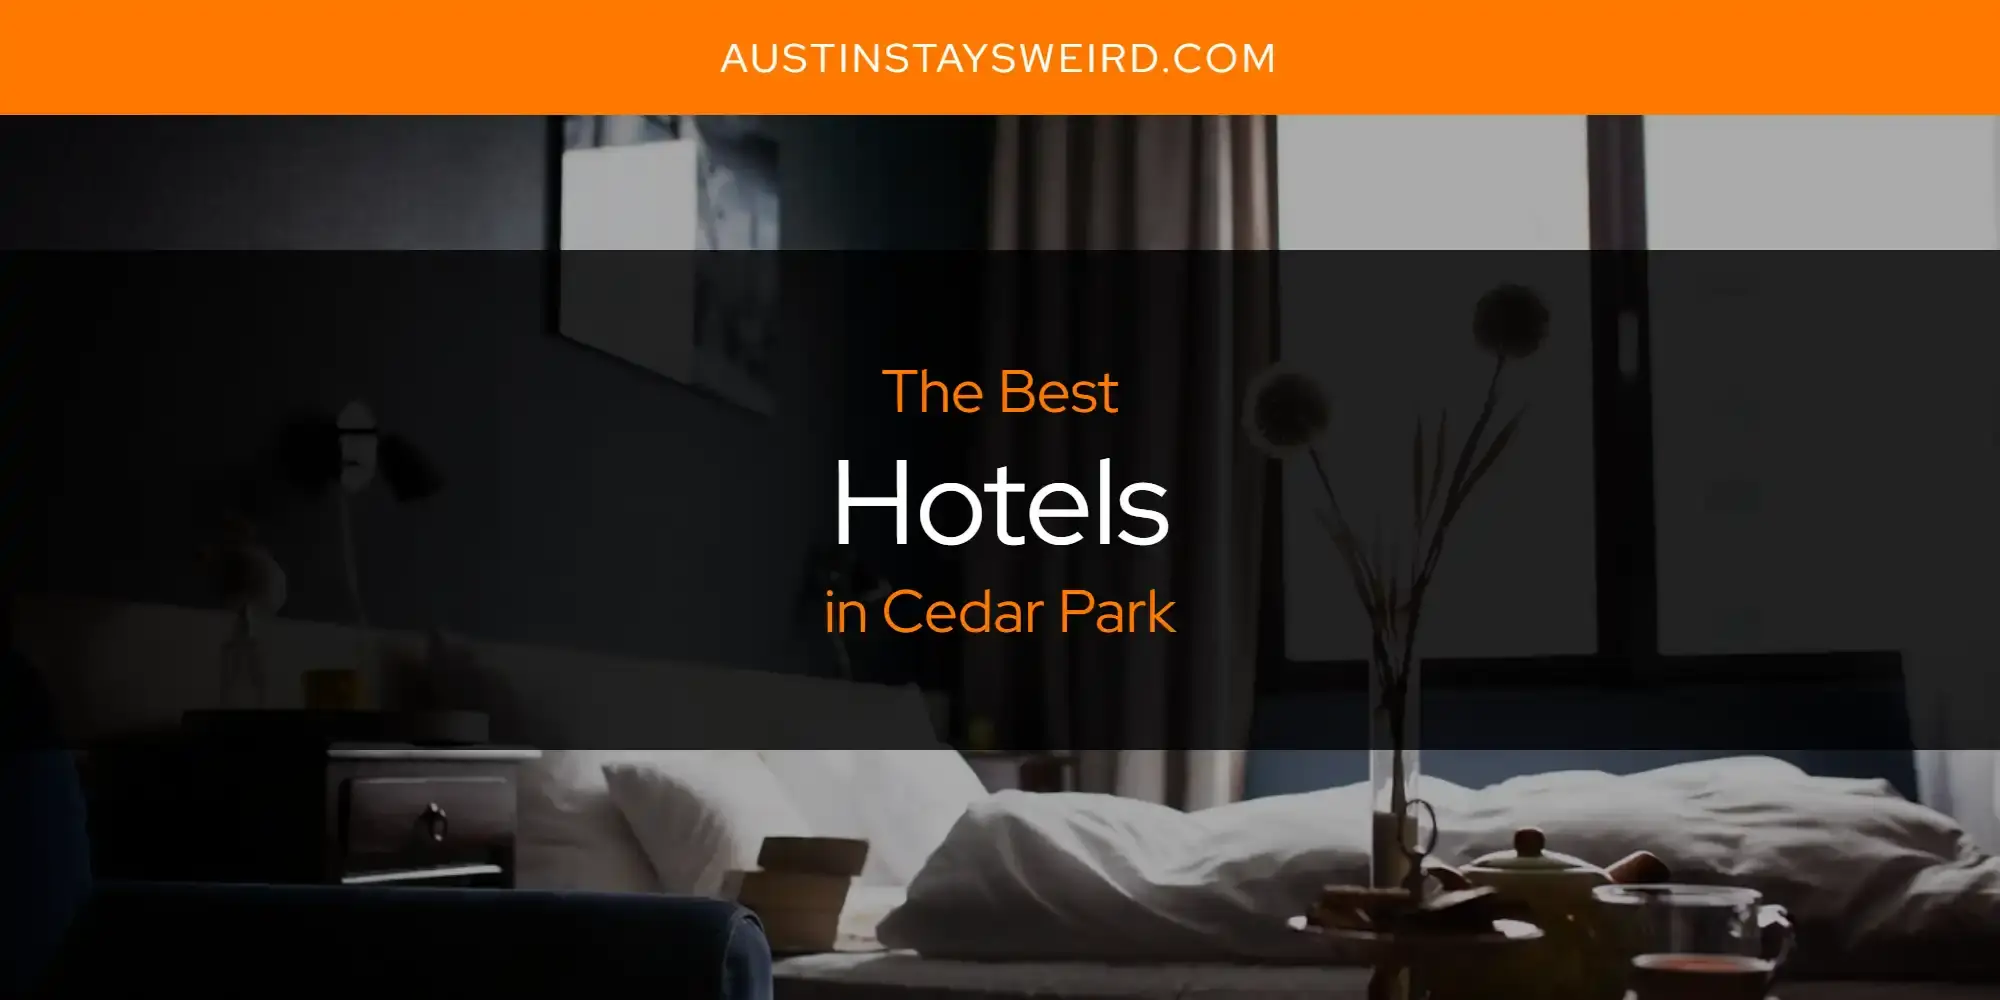 Best Hotels in Cedar Park? Here's the Top 8